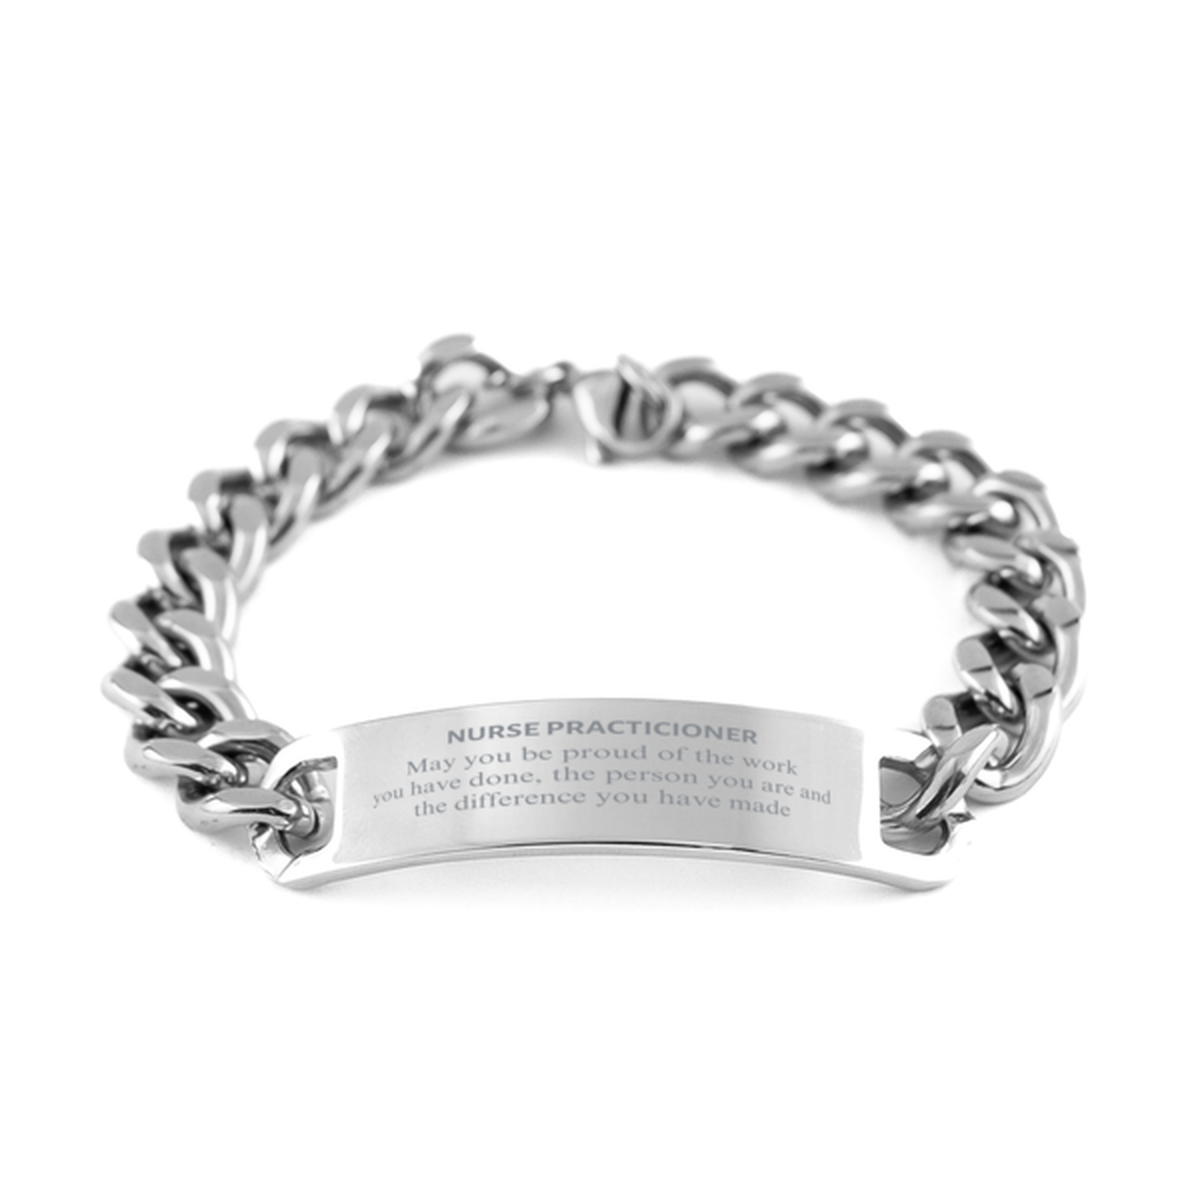 Nurse Practicioner May you be proud of the work you have done, Retirement Nurse Practicioner Cuban Chain Stainless Steel Bracelet for Colleague Appreciation Gifts Amazing for Nurse Practicioner